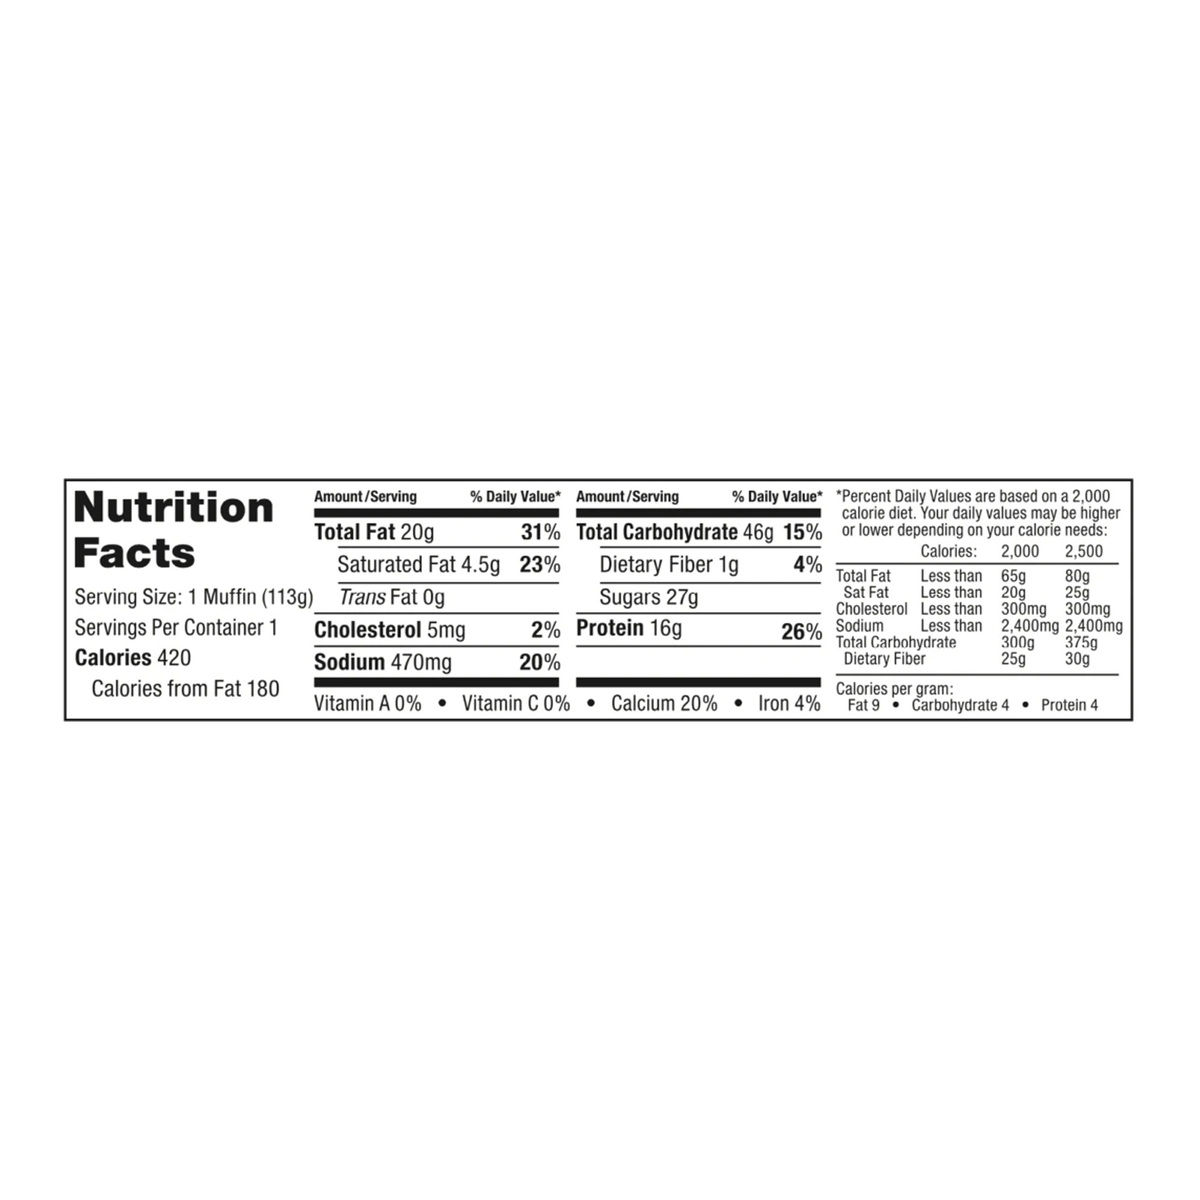 Bake City Blueberry Muffin+Protein, 113 g